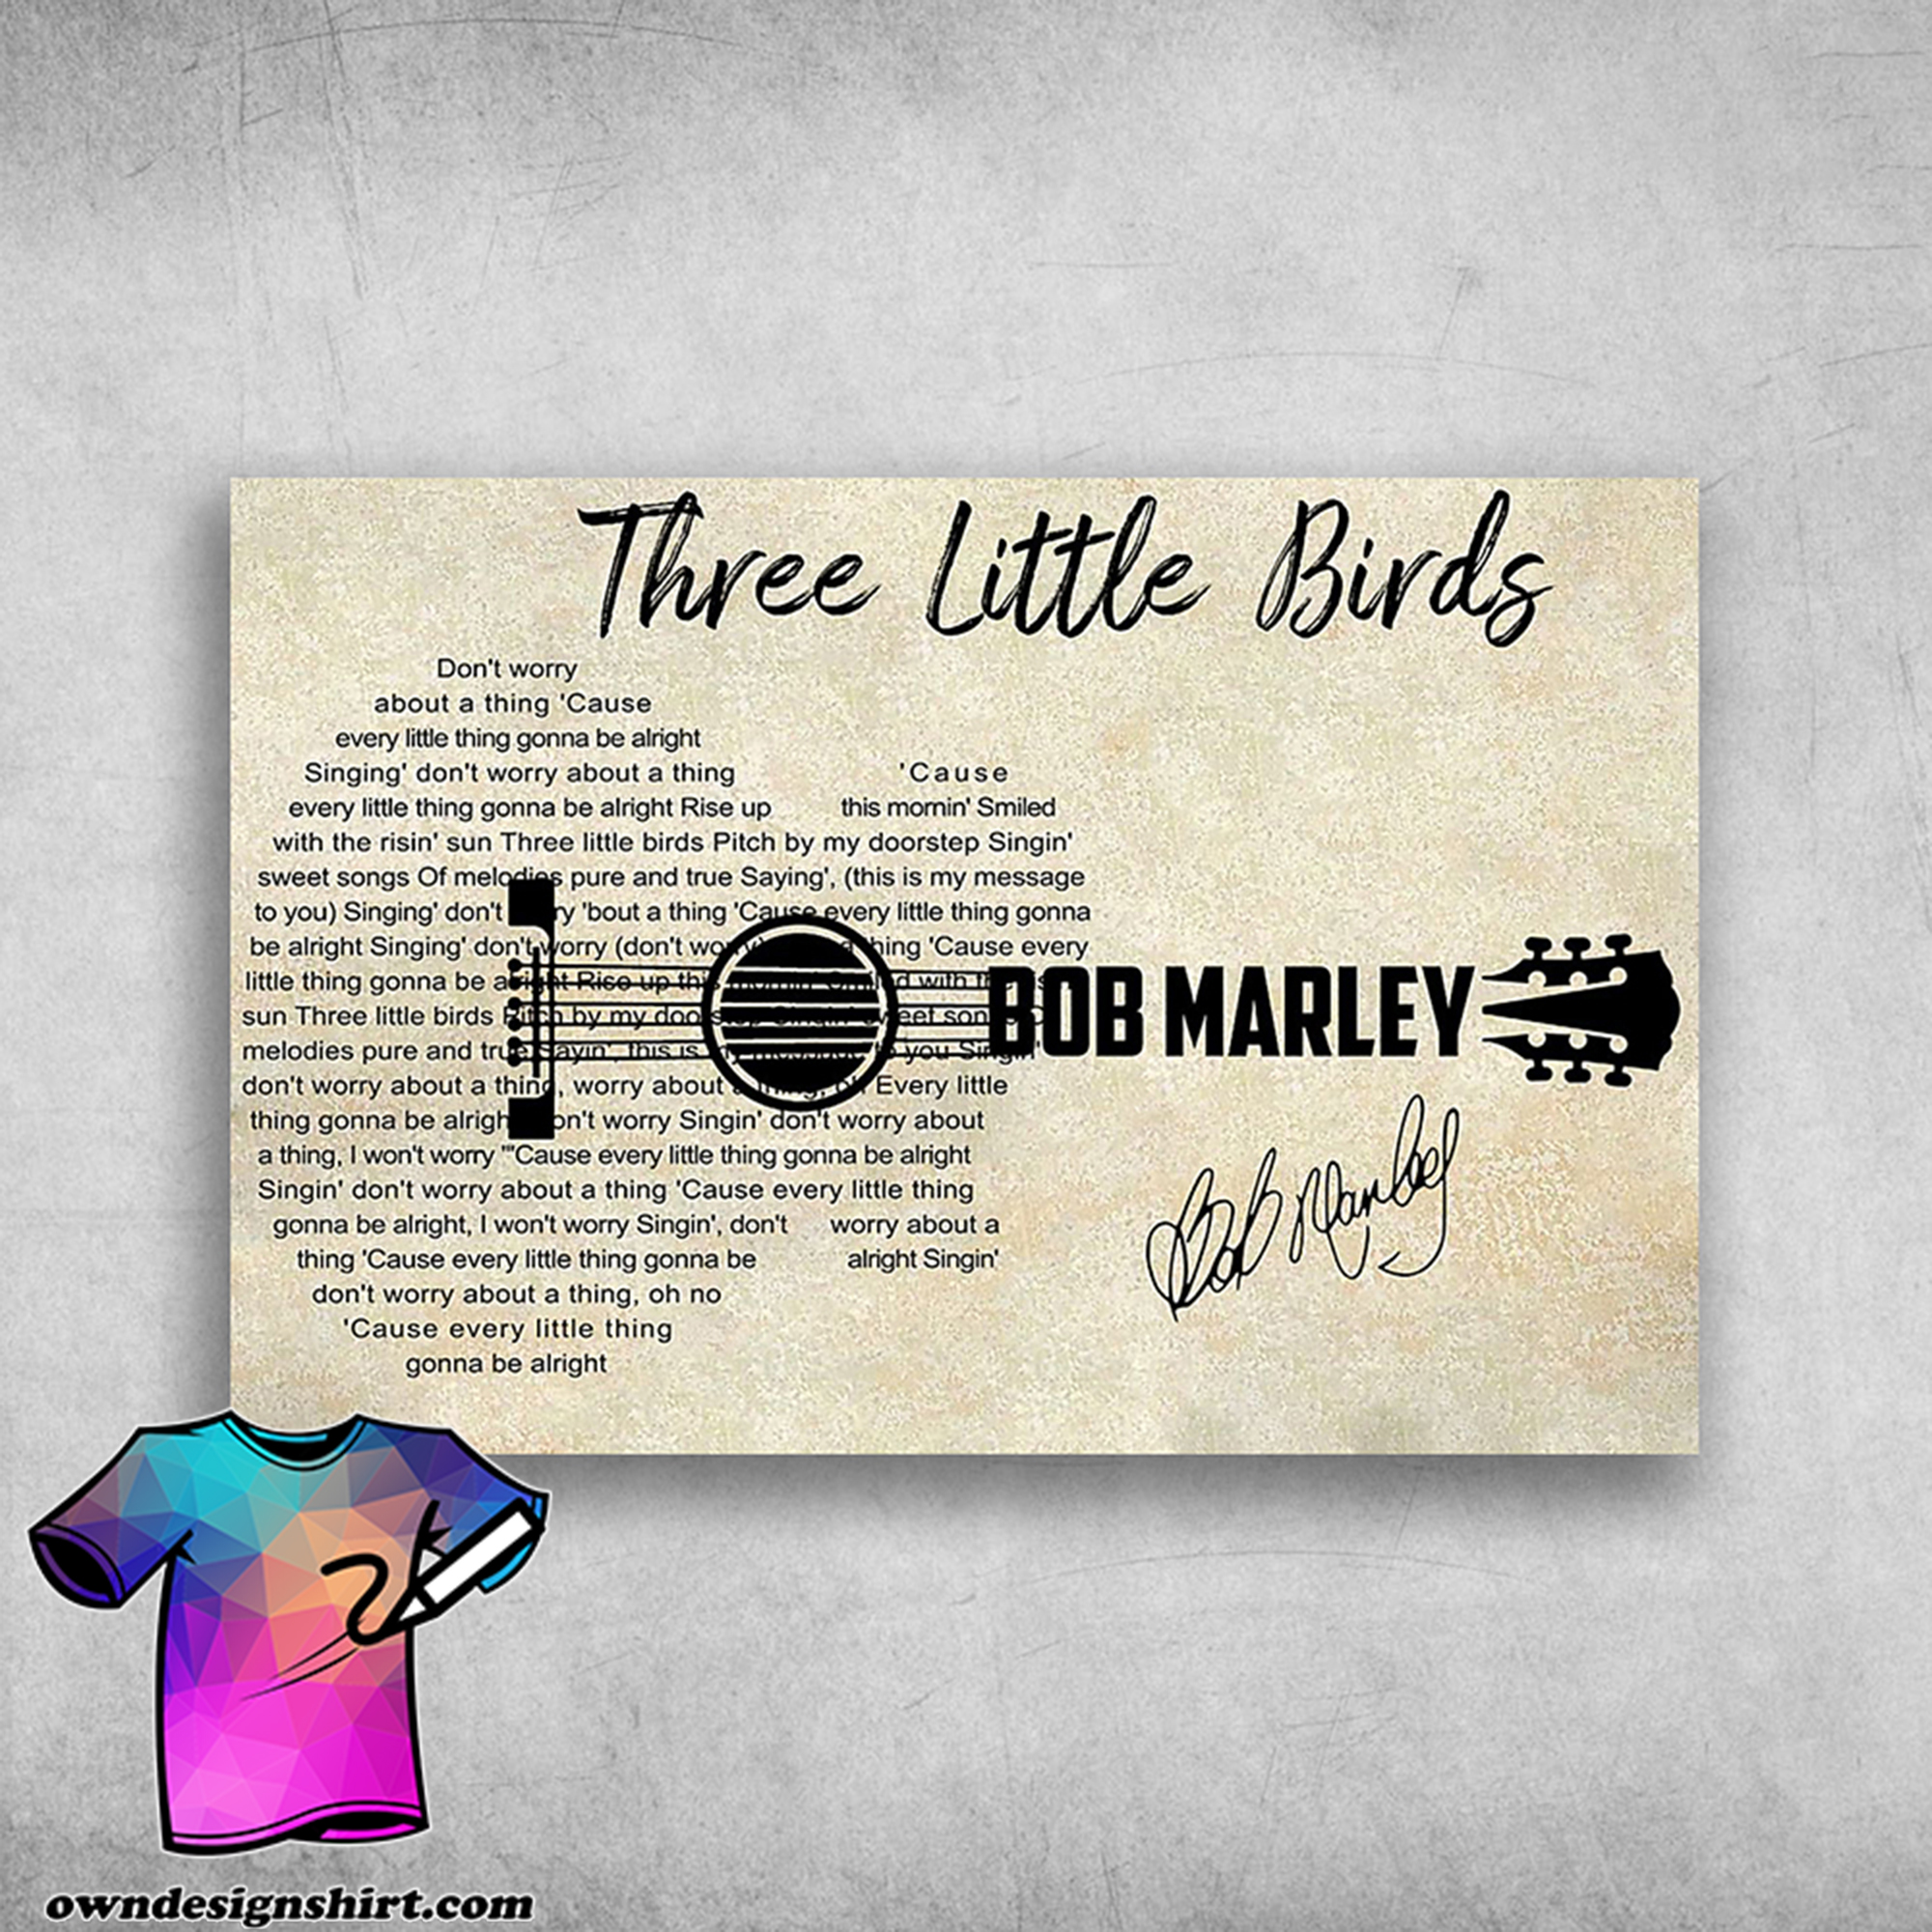 Three little birds bob marley don’t worry about a thing poster